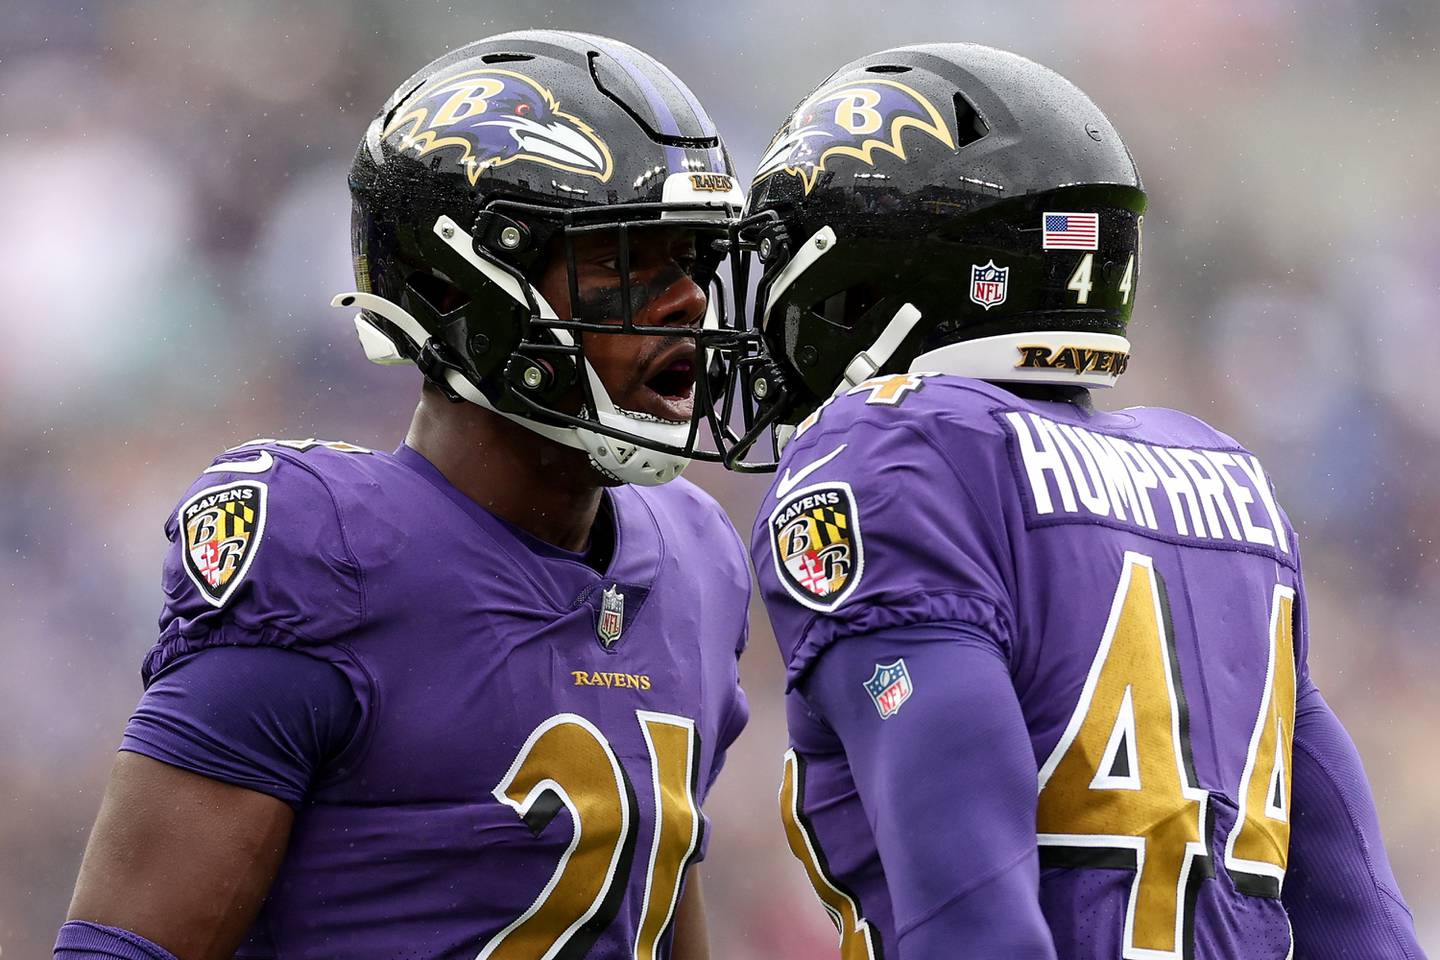 BALTIMORE, MARYLAND - OCTOBER 02: Brandon Stephens #21 and Marlon Humphrey #44 of the Baltimore Ravens celebrate after Humphrey made an interception in the first quarter against the Buffalo Bills at M&T Bank Stadium on October 02, 2022 in Baltimore, Maryland.